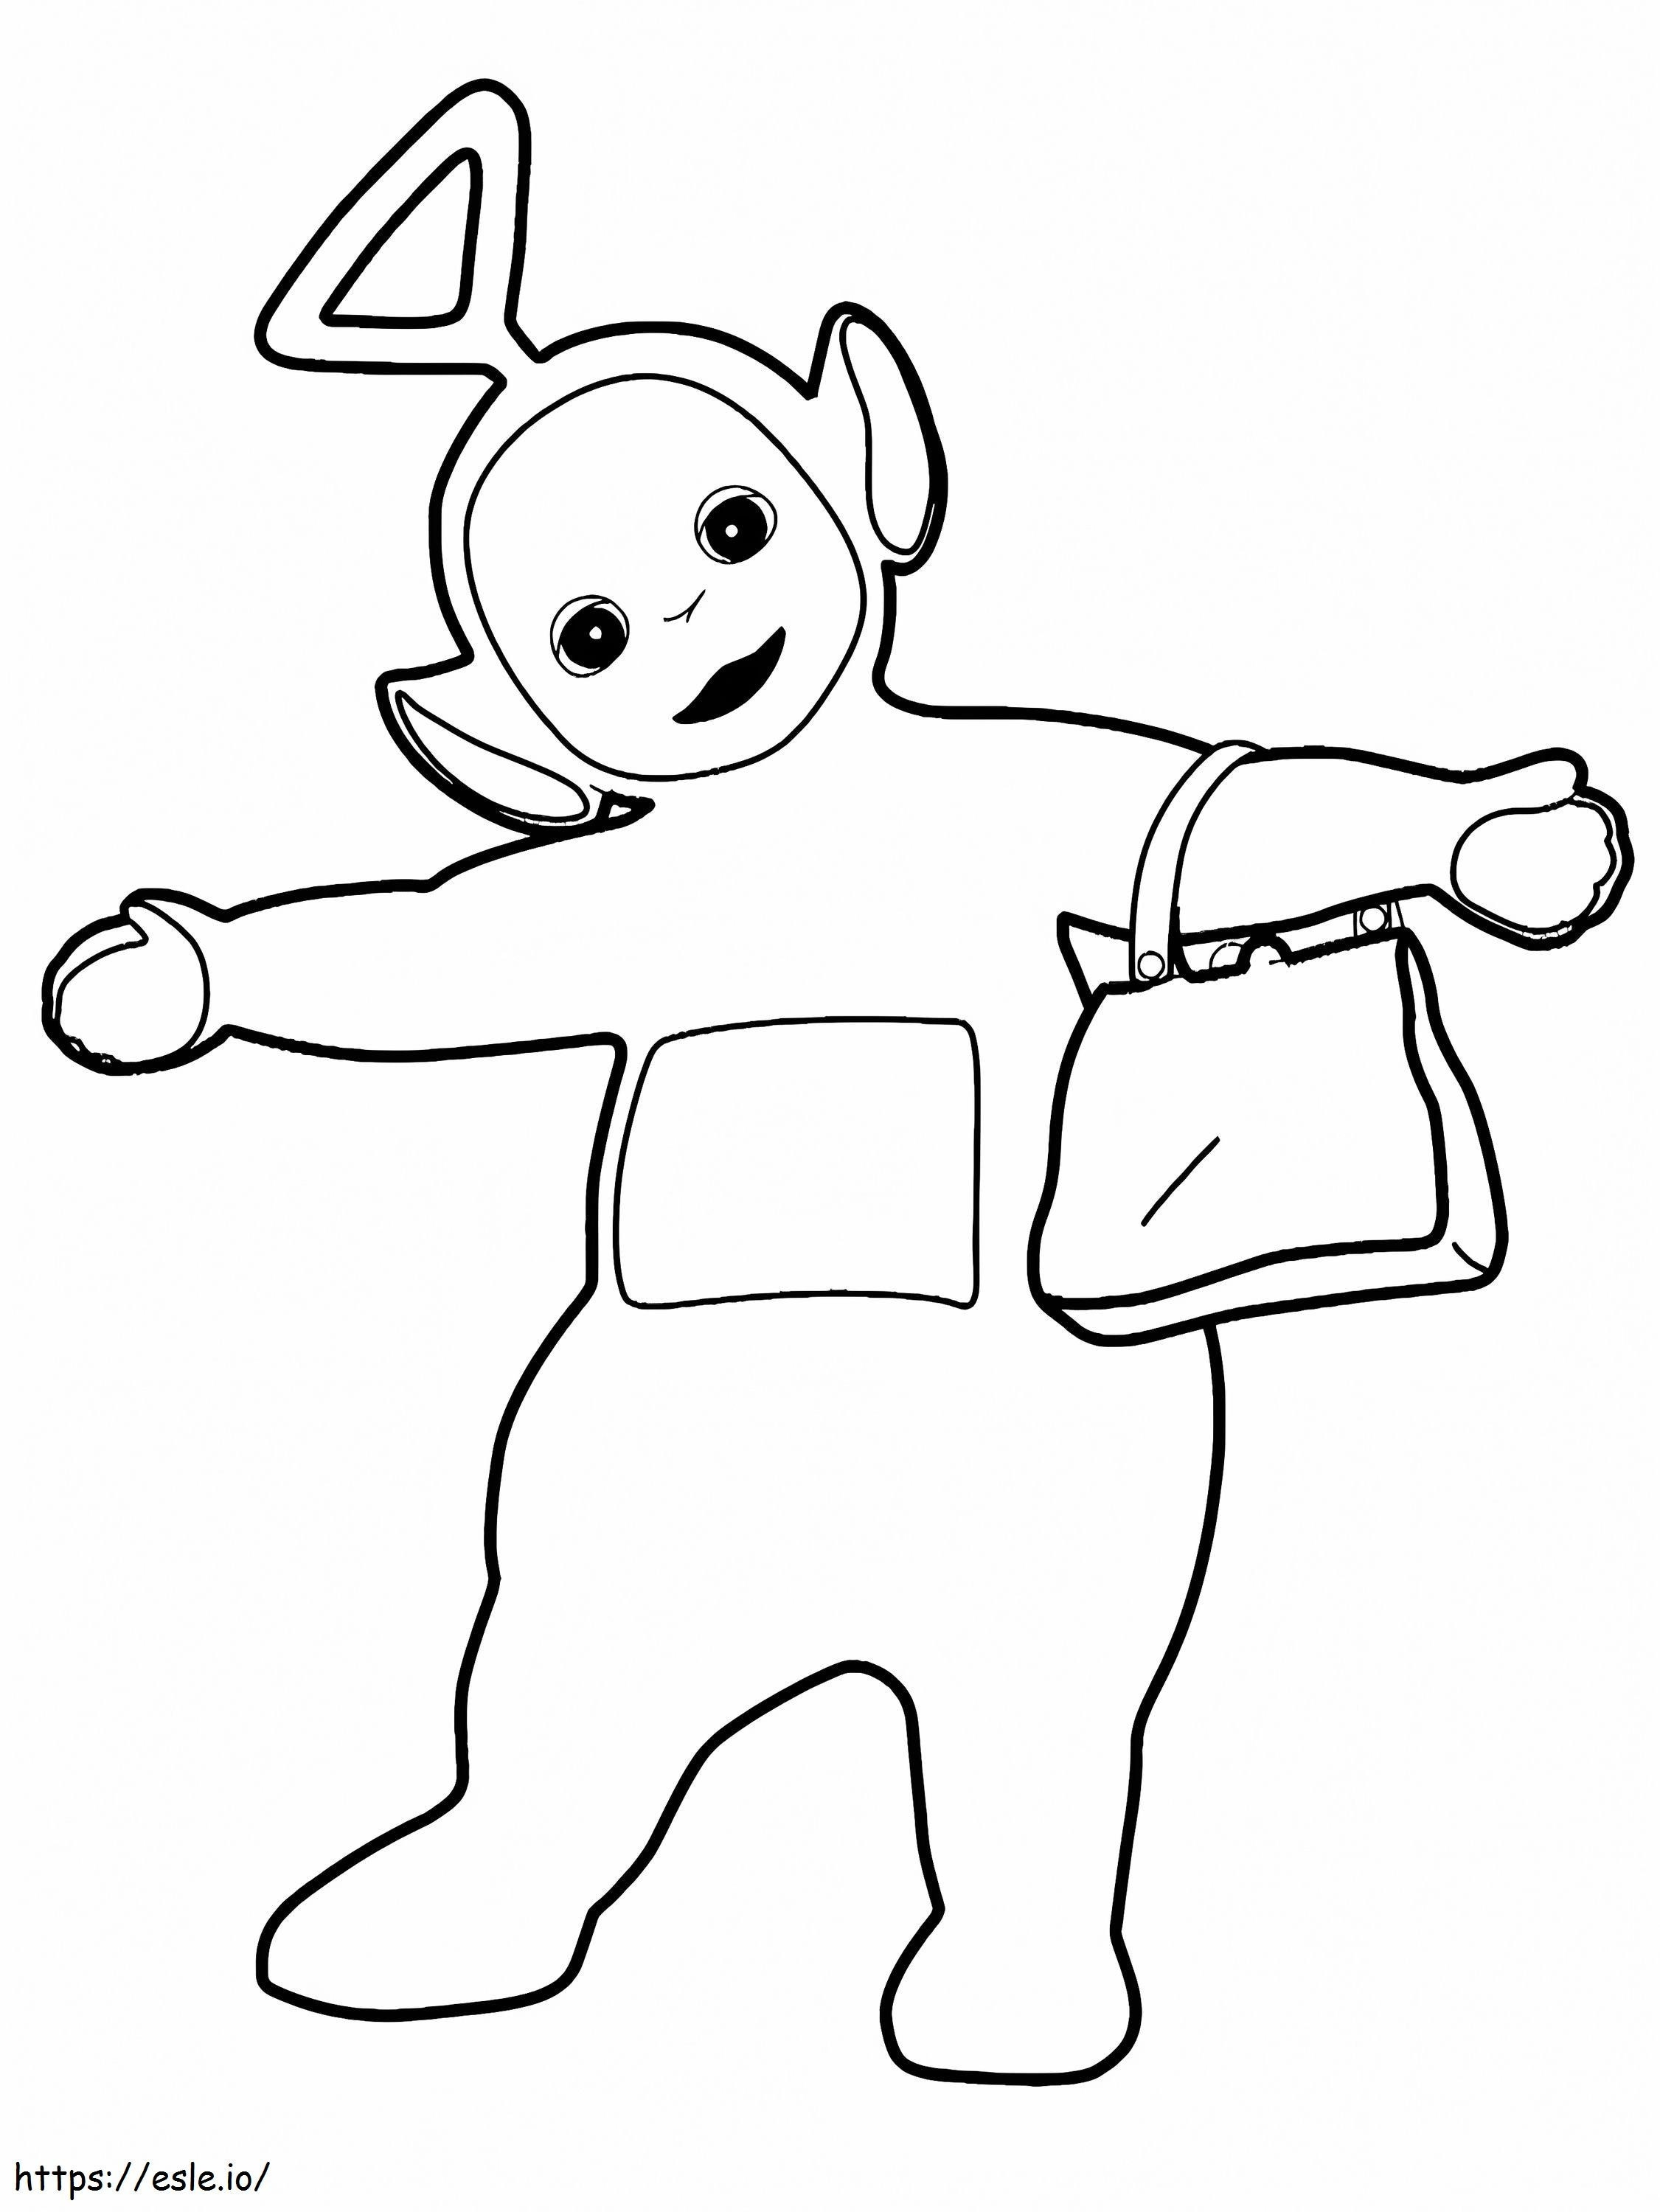 Teletubbies 02 02 coloring page